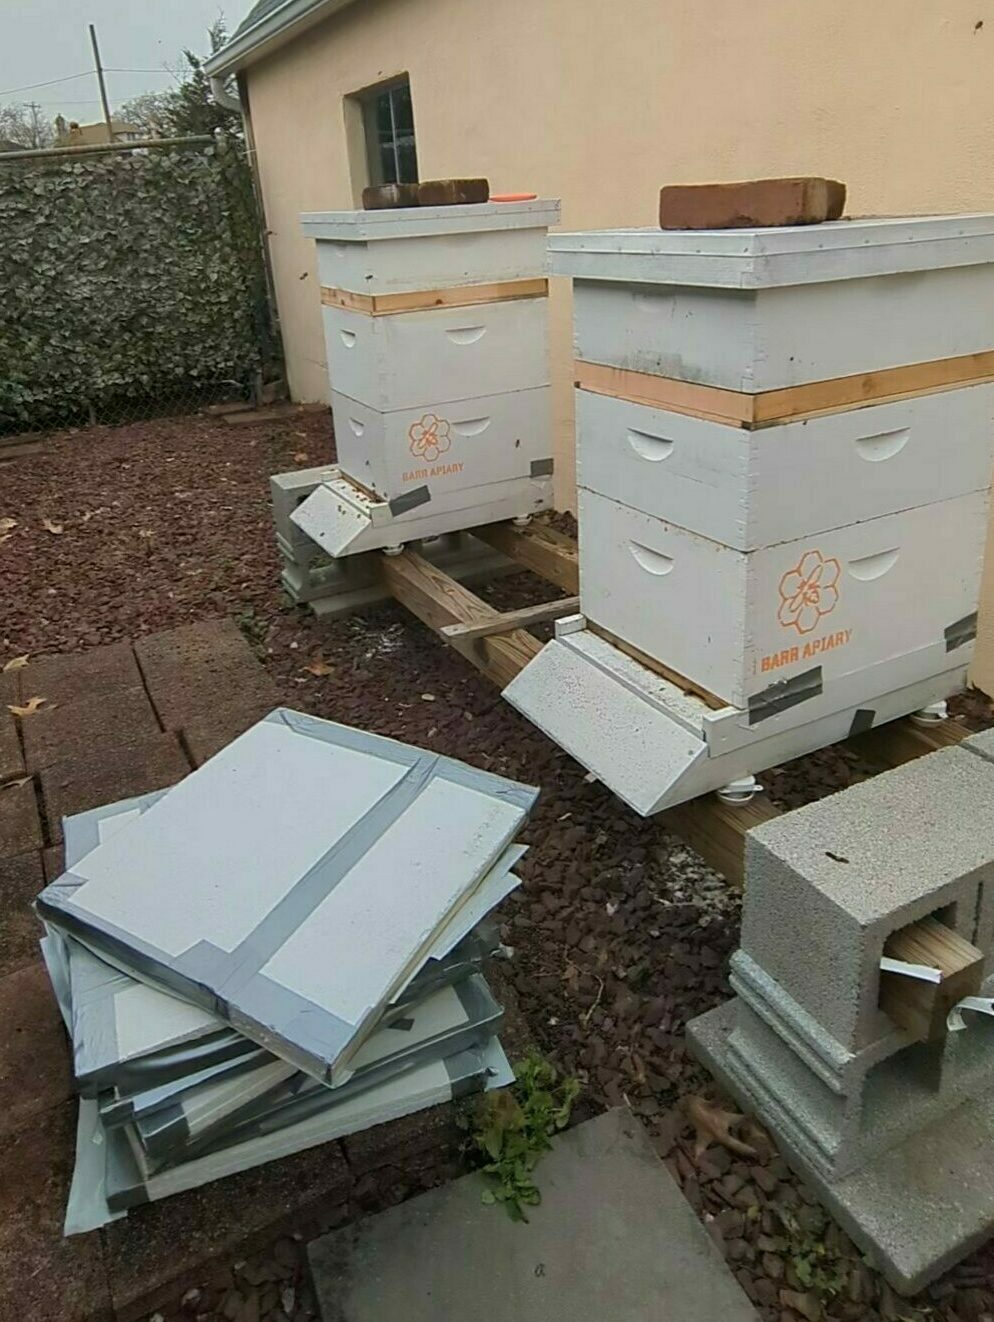 two hives in an apiary with insulated winter covers removed